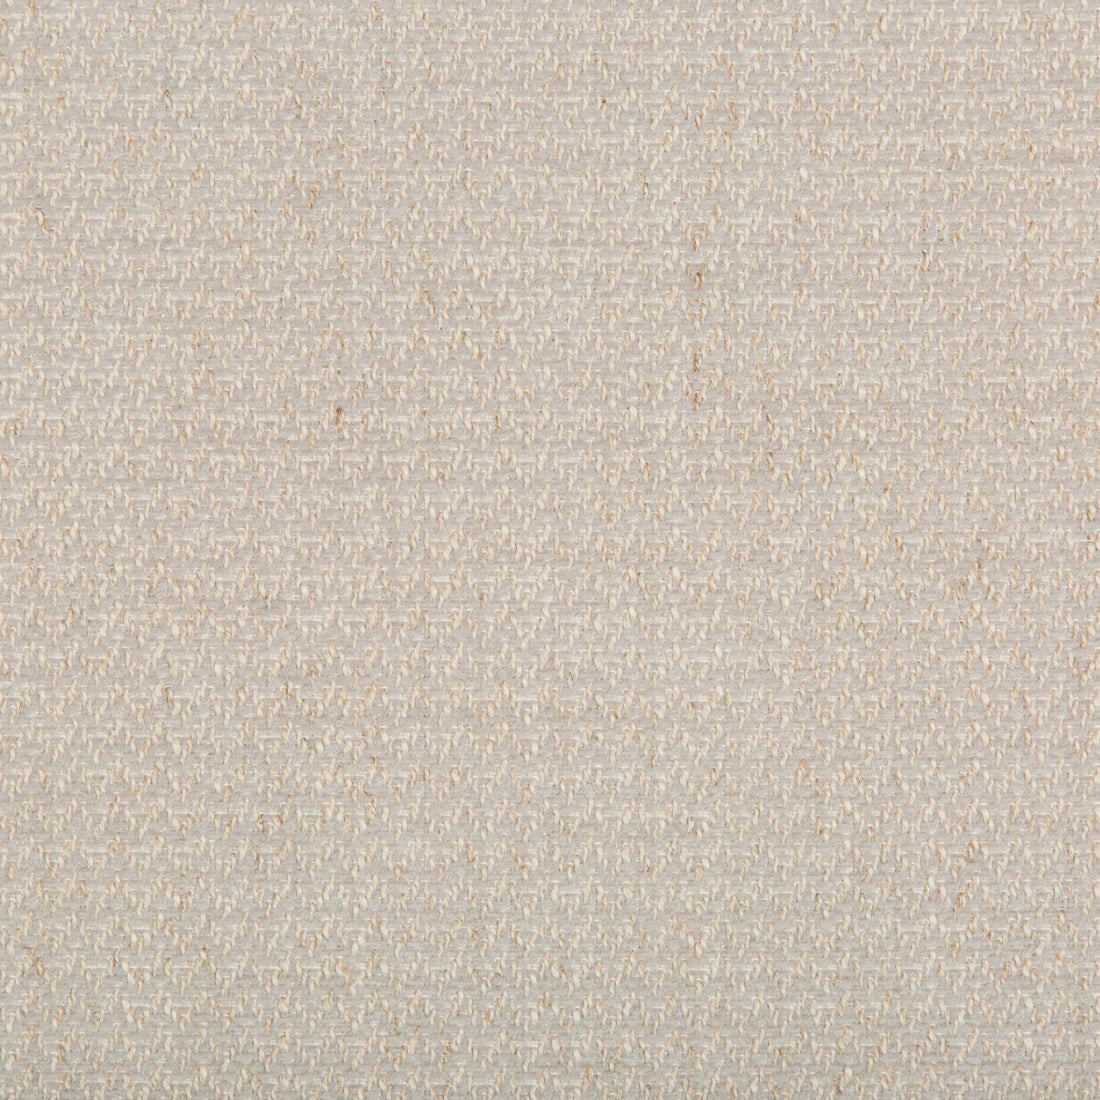 Kravet Contract fabric in 35408-11 color - pattern 35408.11.0 - by Kravet Contract in the Crypton Incase collection